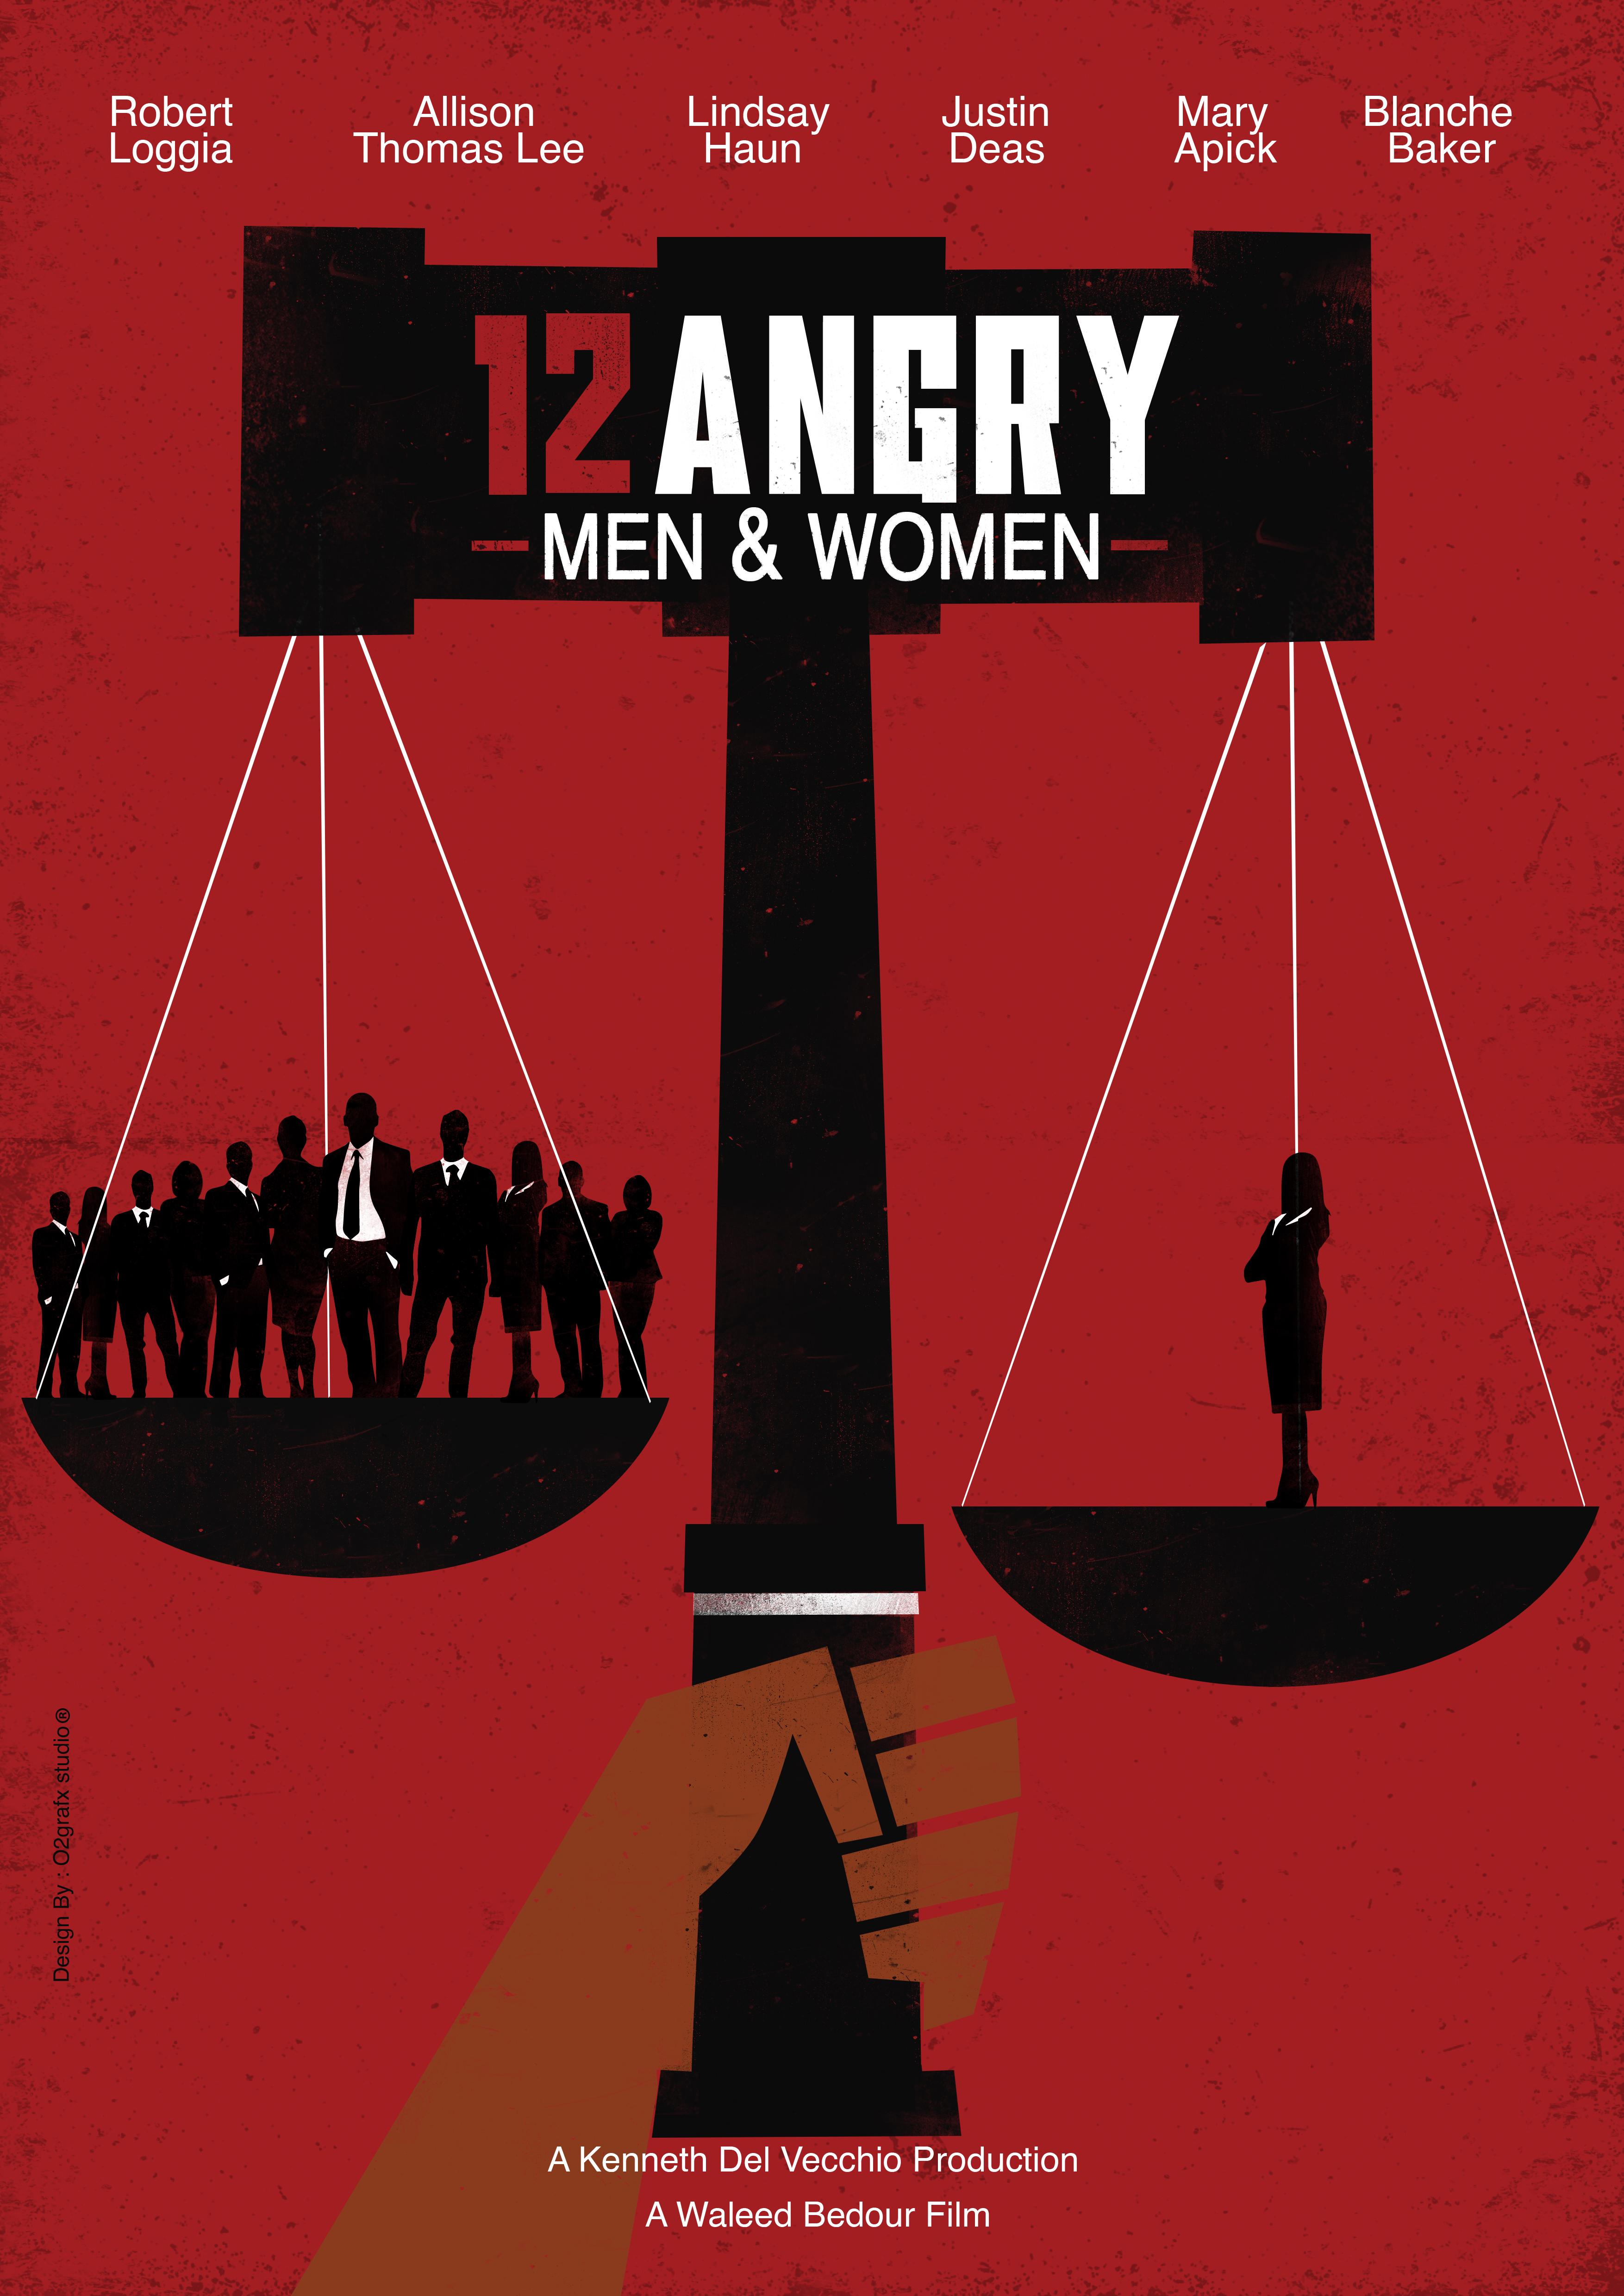 12 ANGRY MEN & WOMEN POSTER